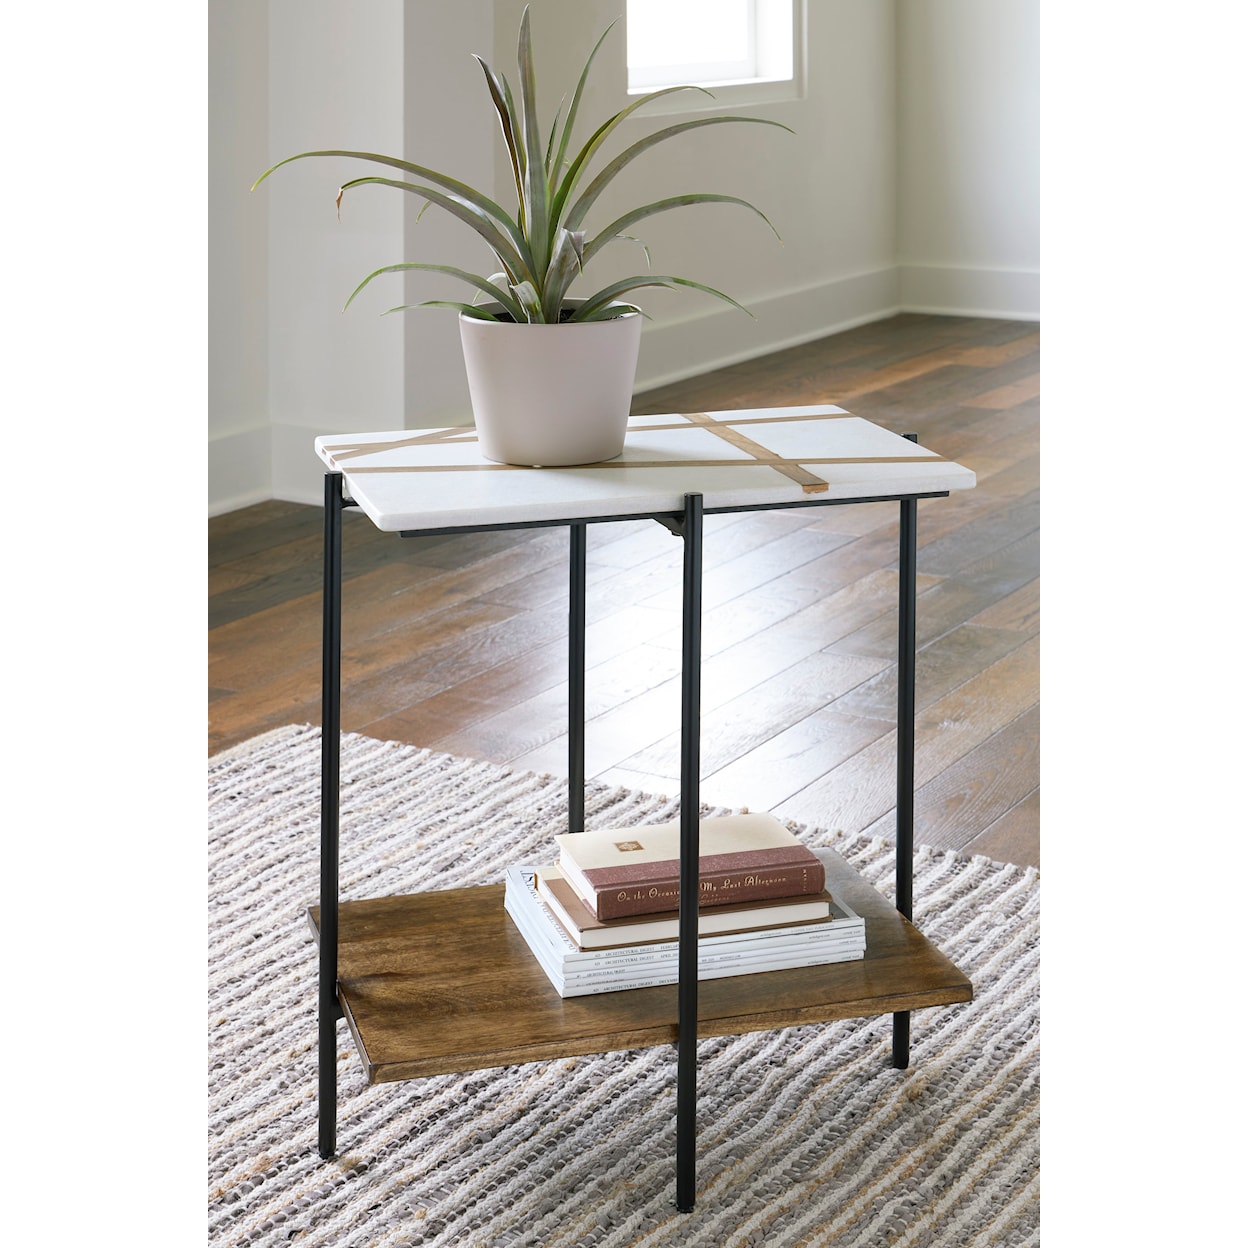 Michael Alan Select Braxmore Accent Table